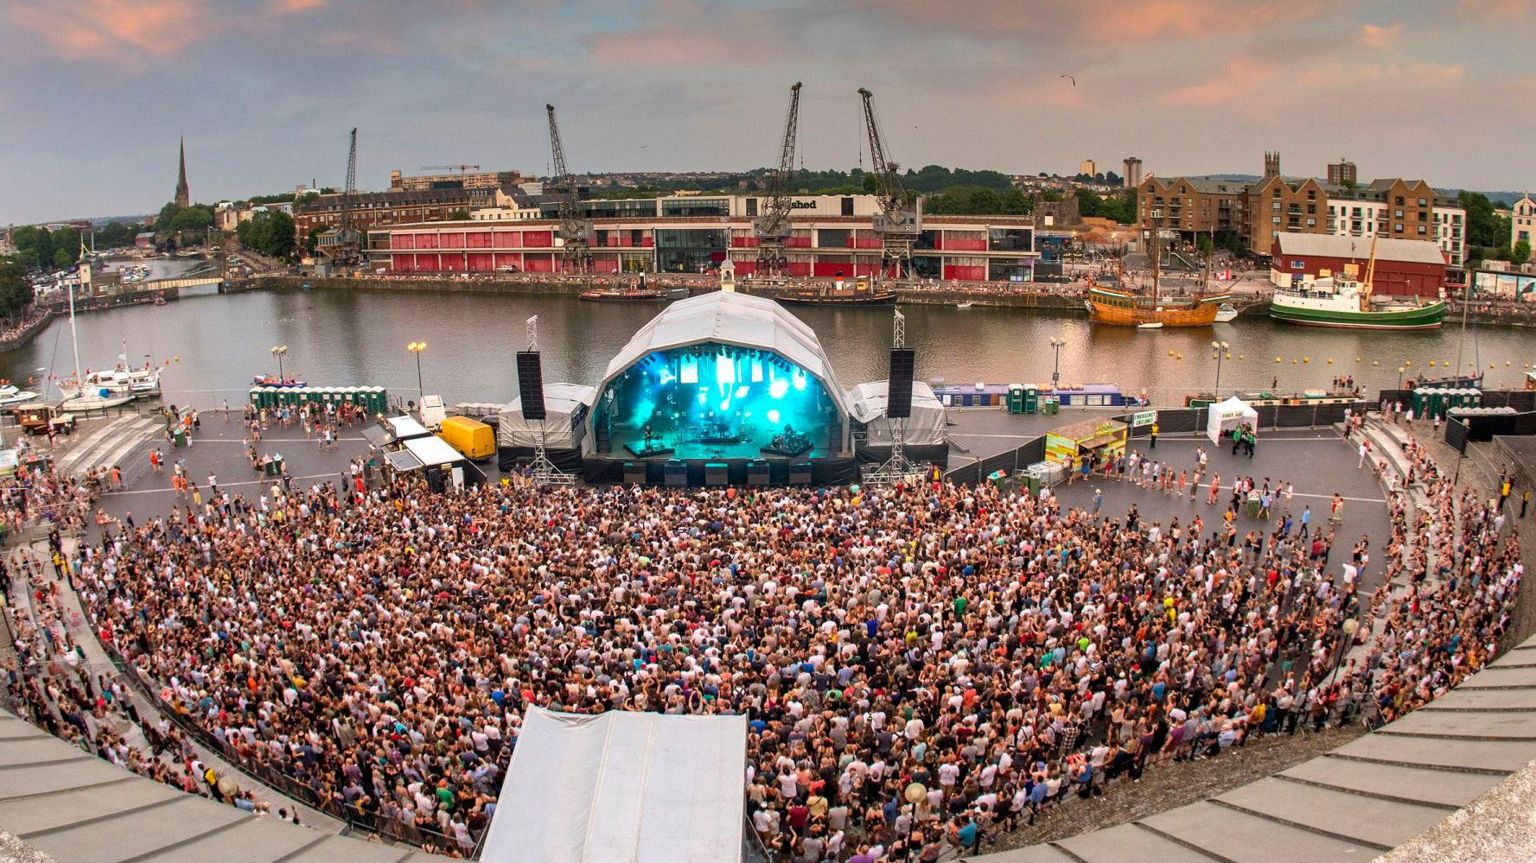 A performance at Bristol Sounds. The city's harbourside can be seen behind the stage, across the water. A large crowd are stood watching the performance. The stage is lit with blue lights. 